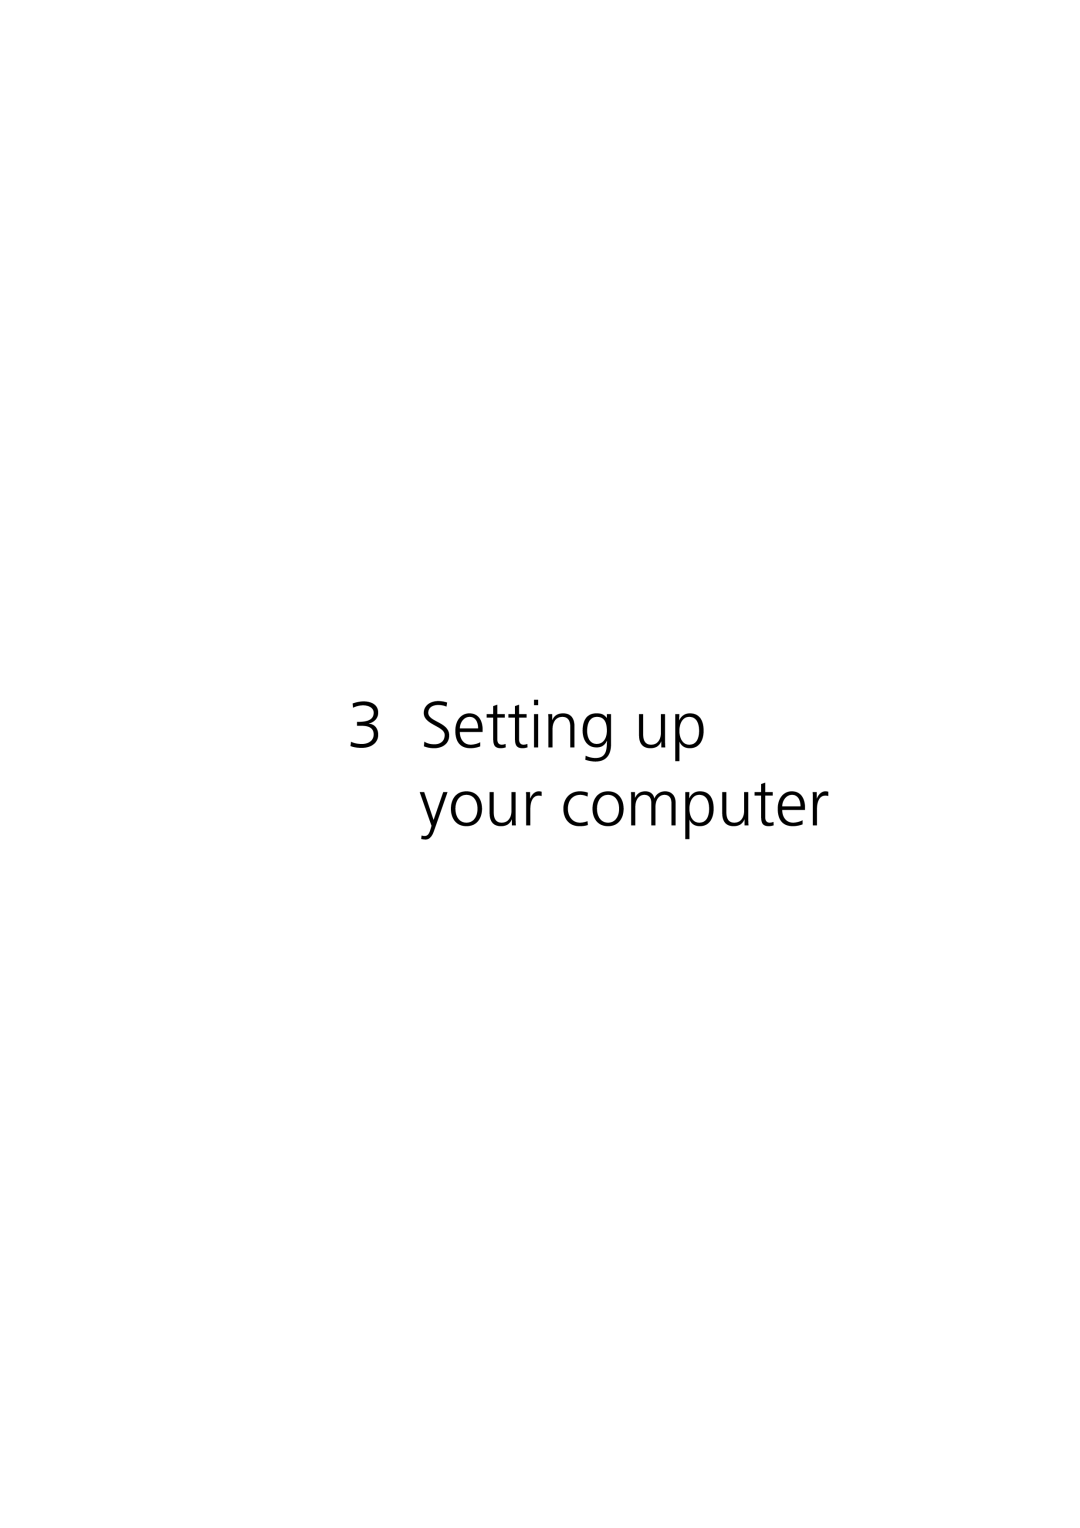 Acer 7600 manual Setting up your computer 